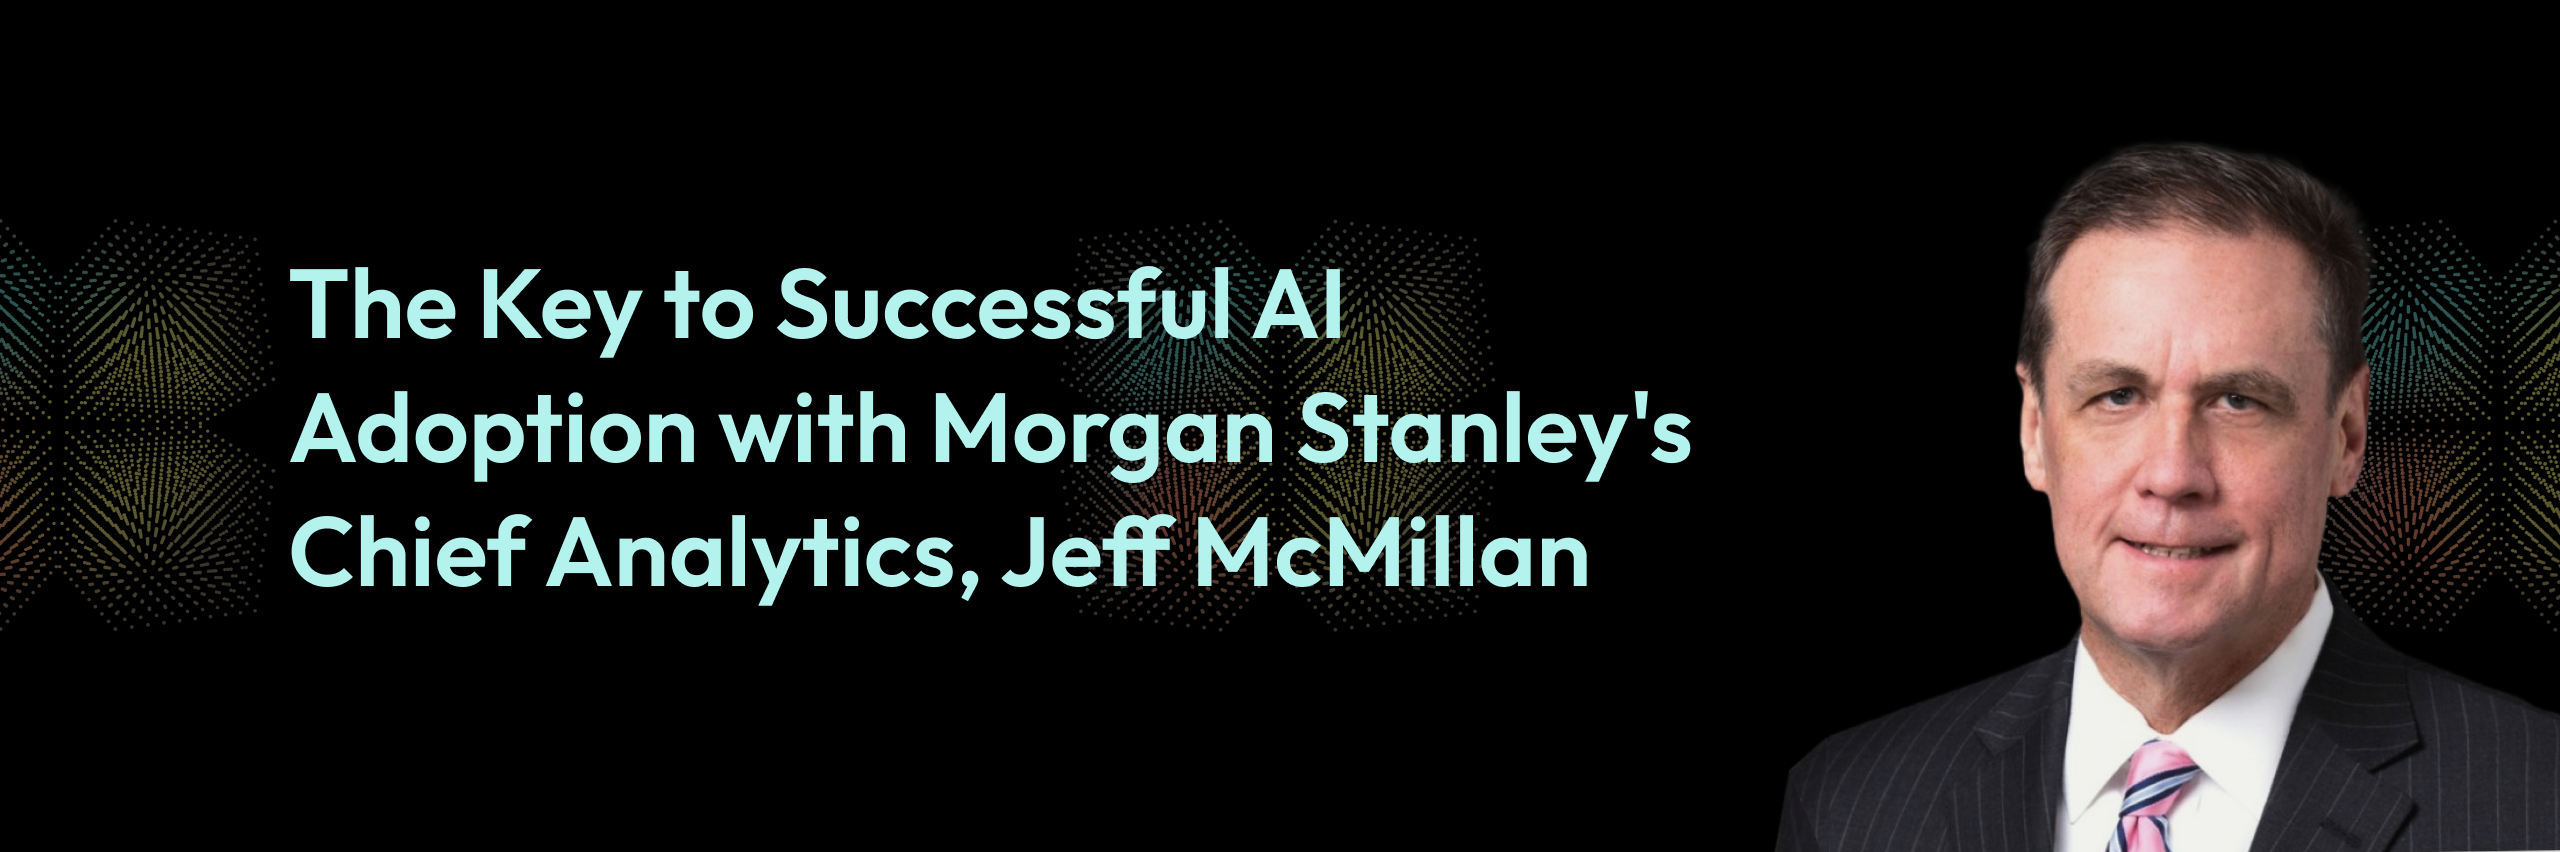 Morgan Stanley’s Chief Analytics and Data Officer, Jeff McMillan, Shares the Keys to Successful AI Adoption